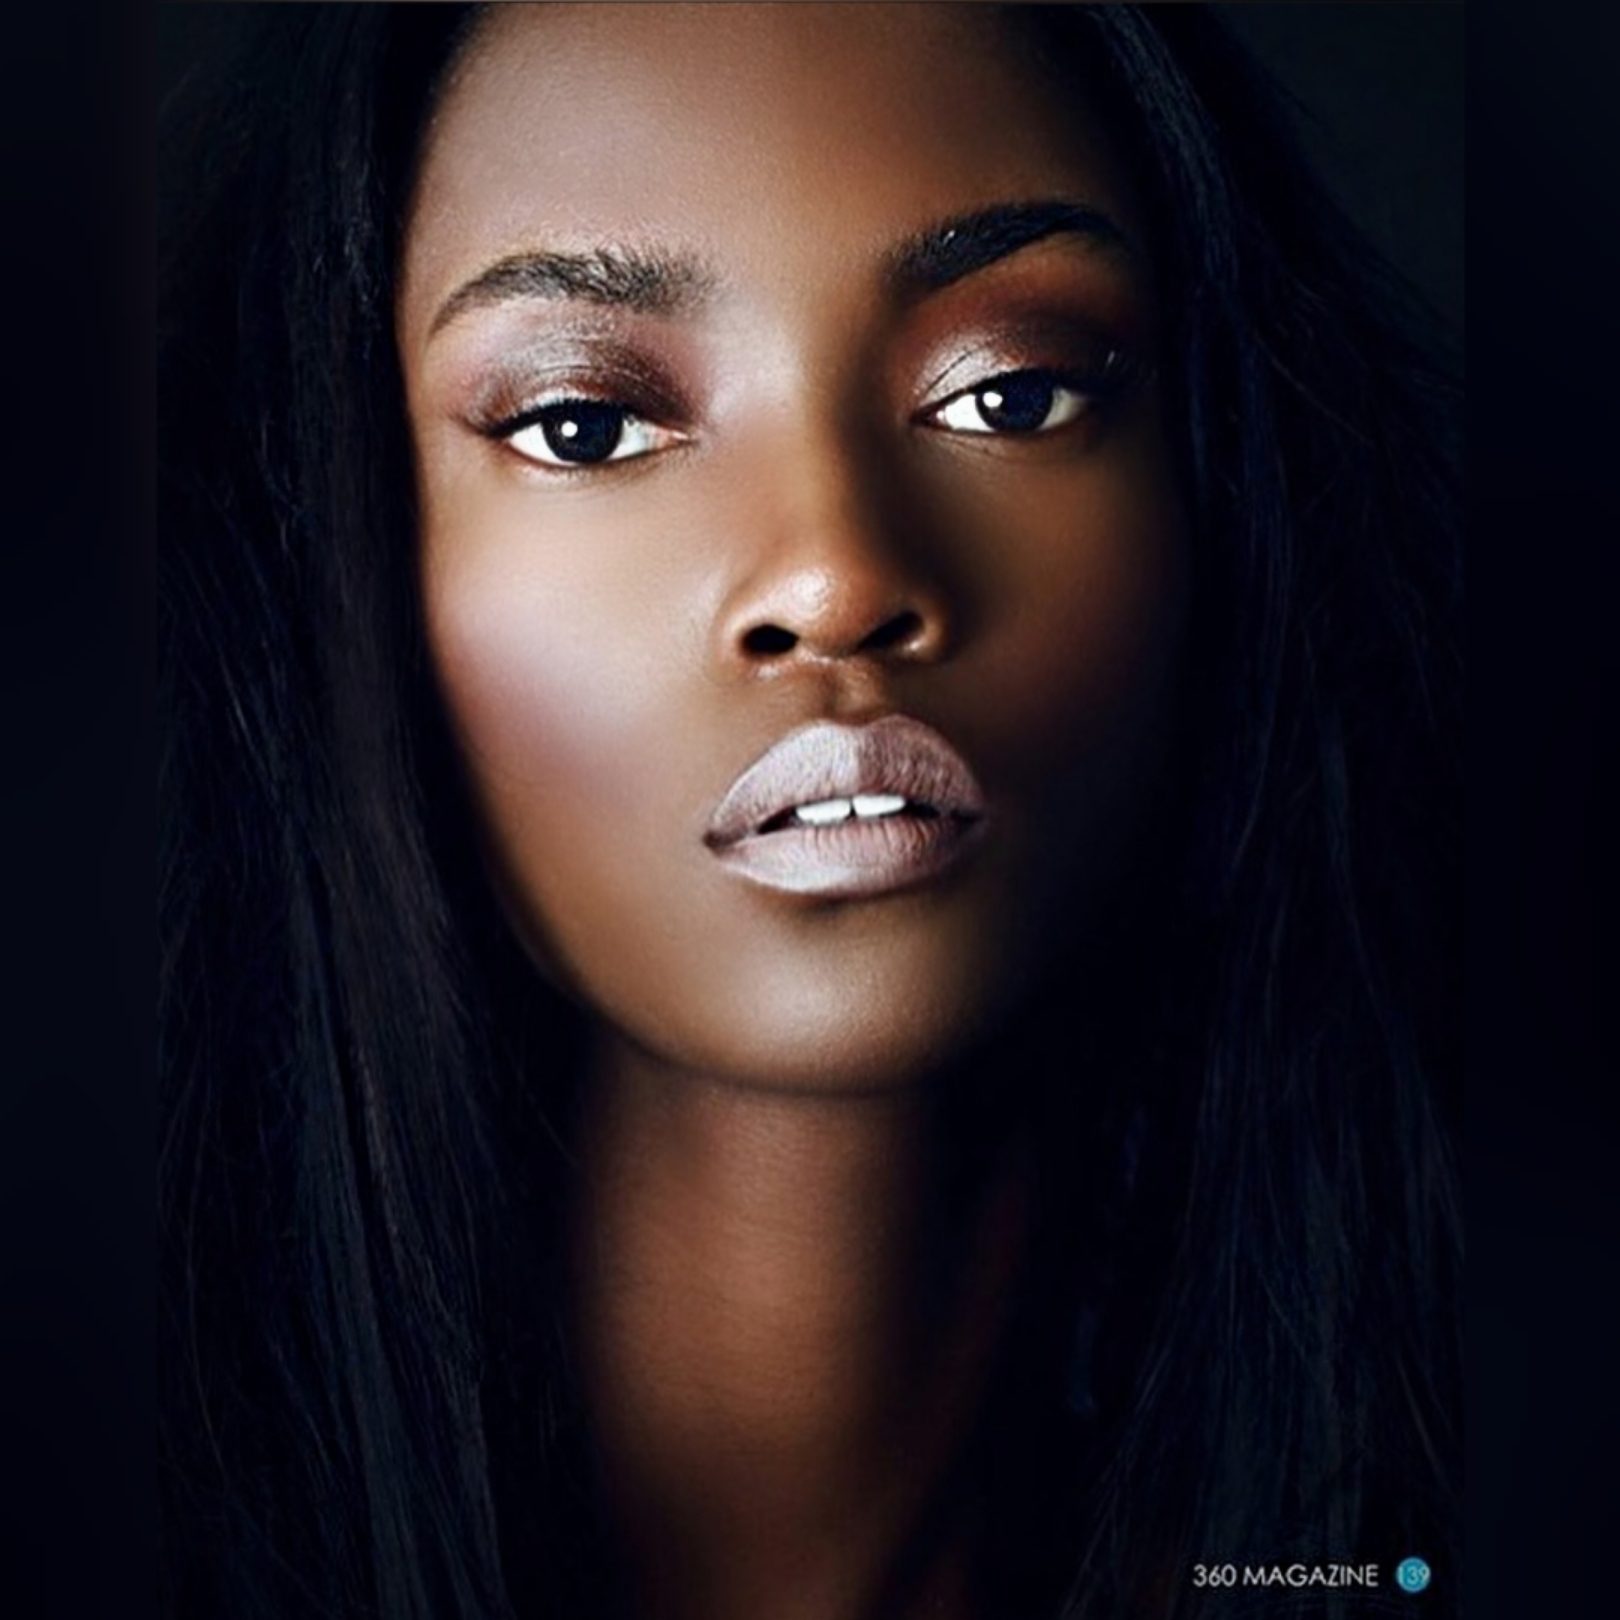 IMG supermodel and singer Ebony Riley captured by Tyren Redd for Vaughn Lowery's 360 MAGAZINE.